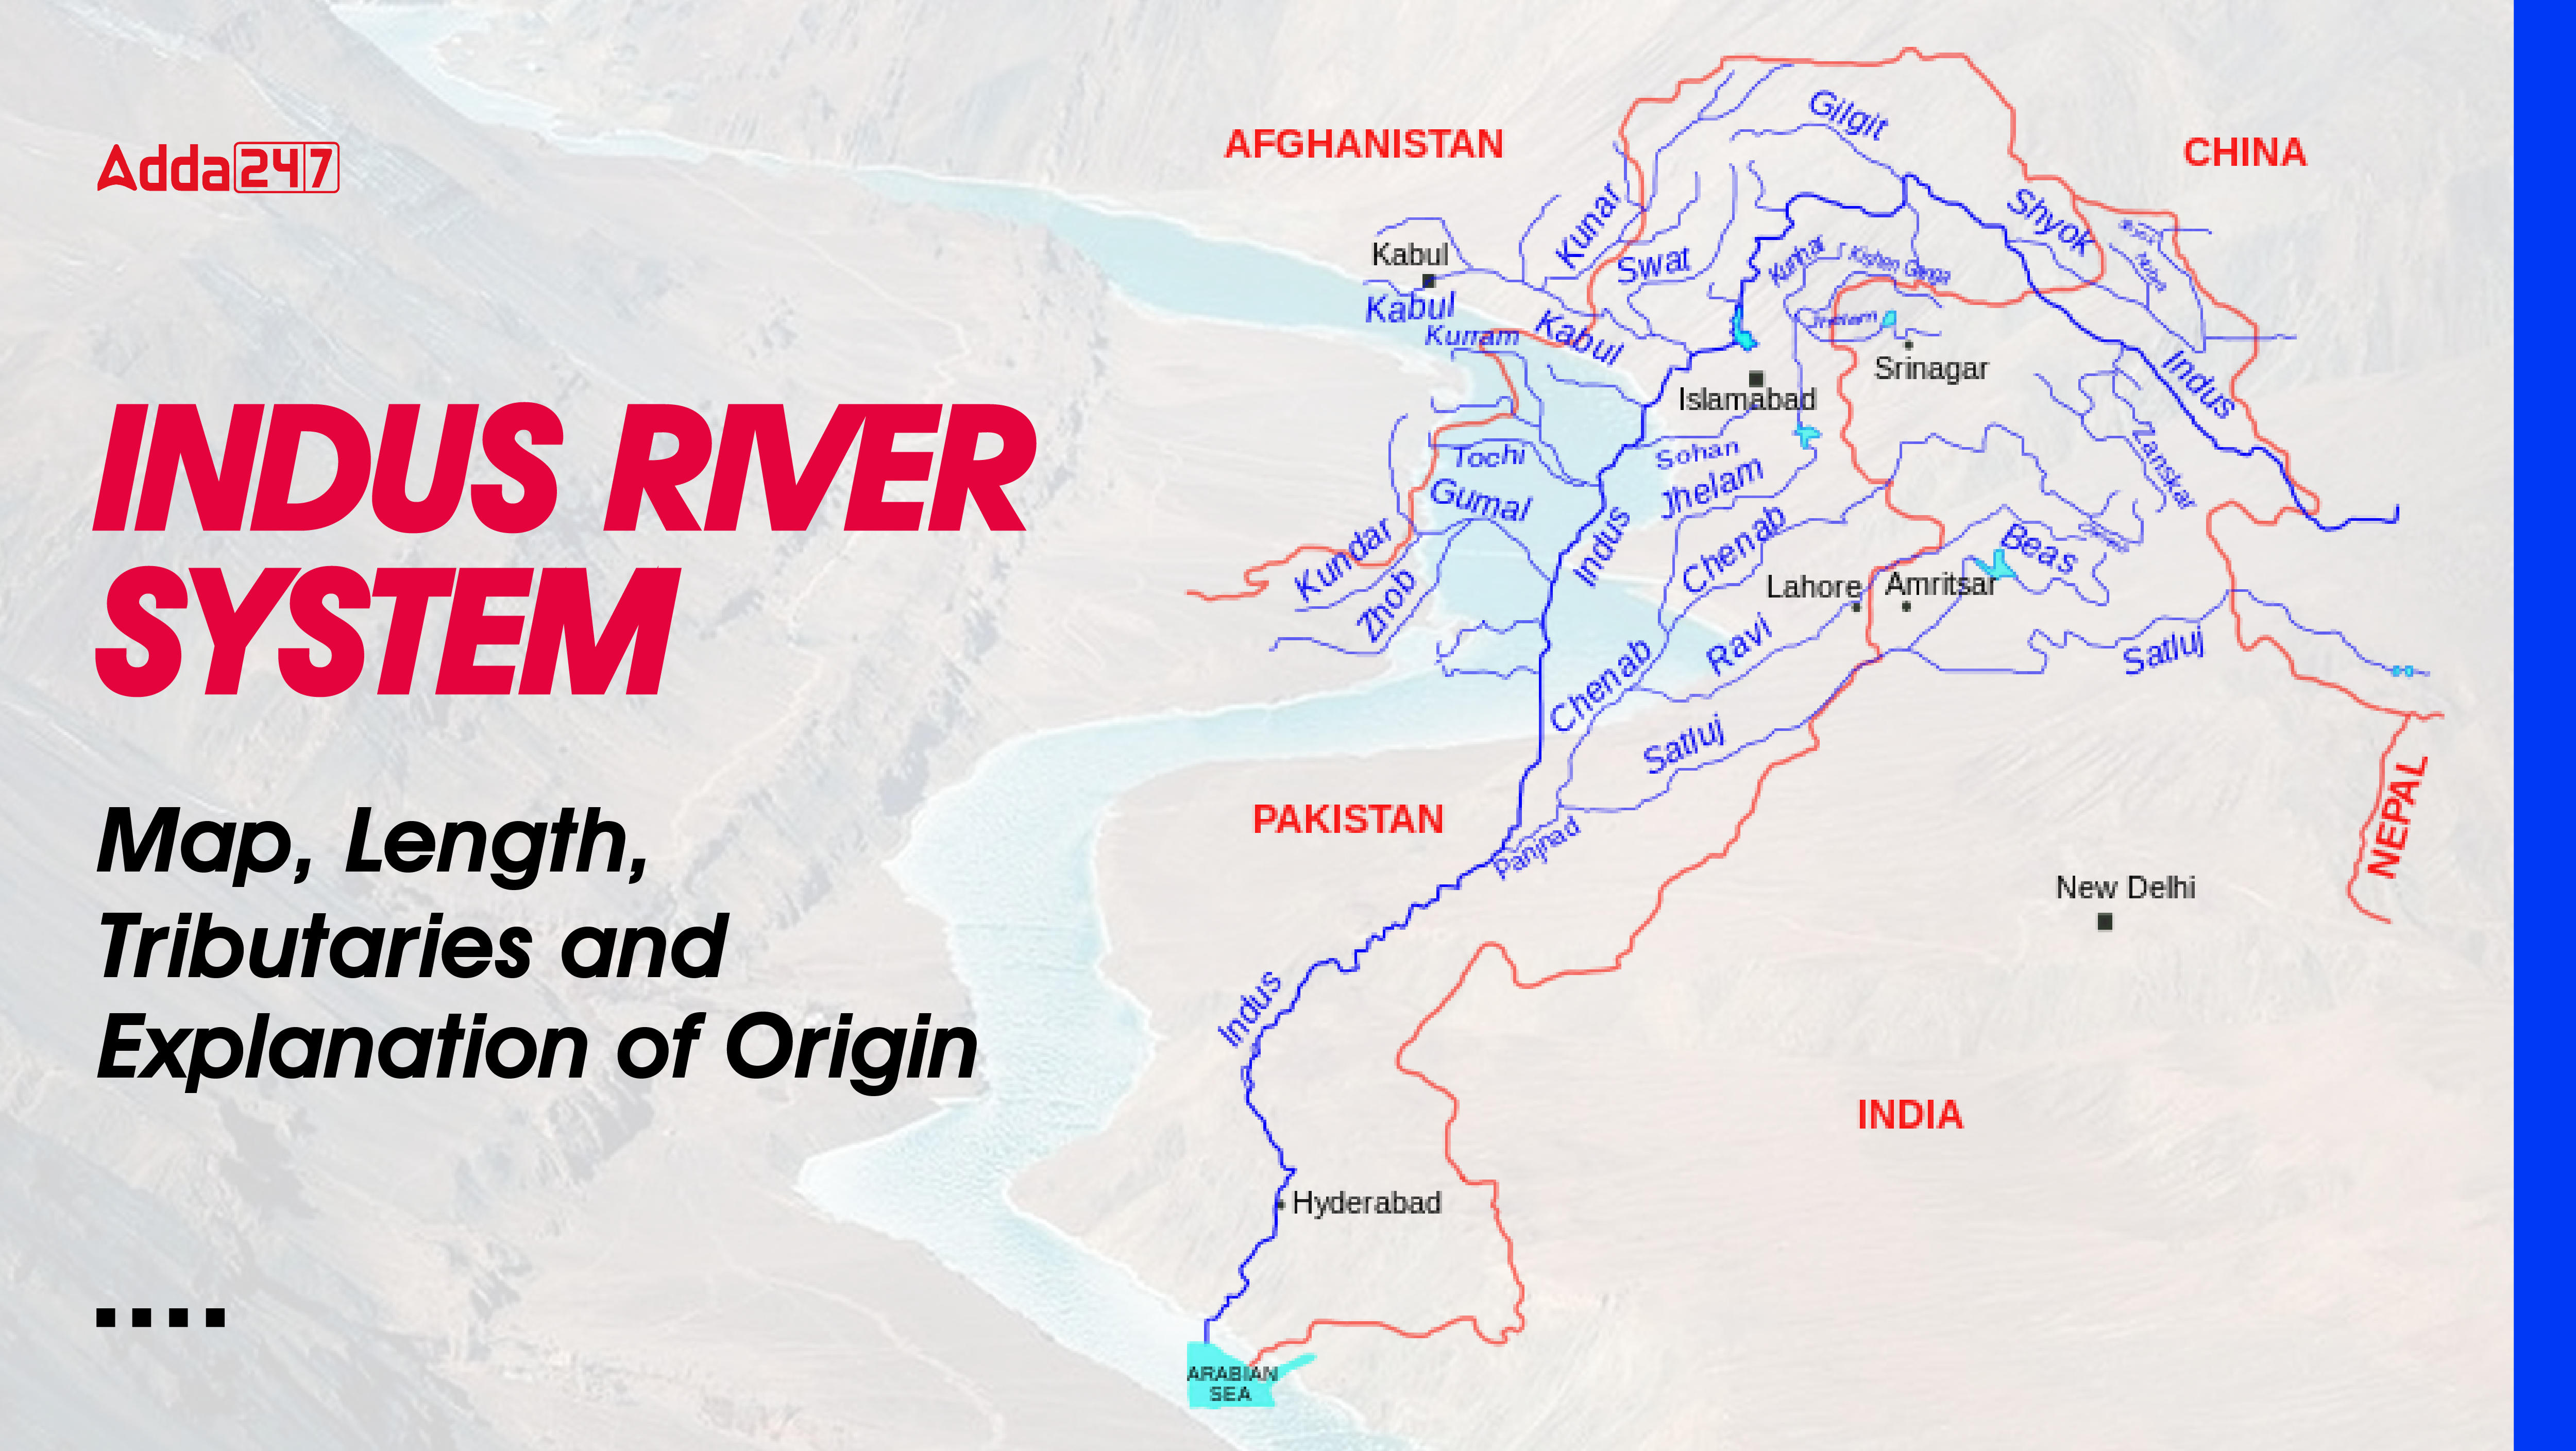 Indus River System: Map, Length, Tributaries and Explanation of Origin